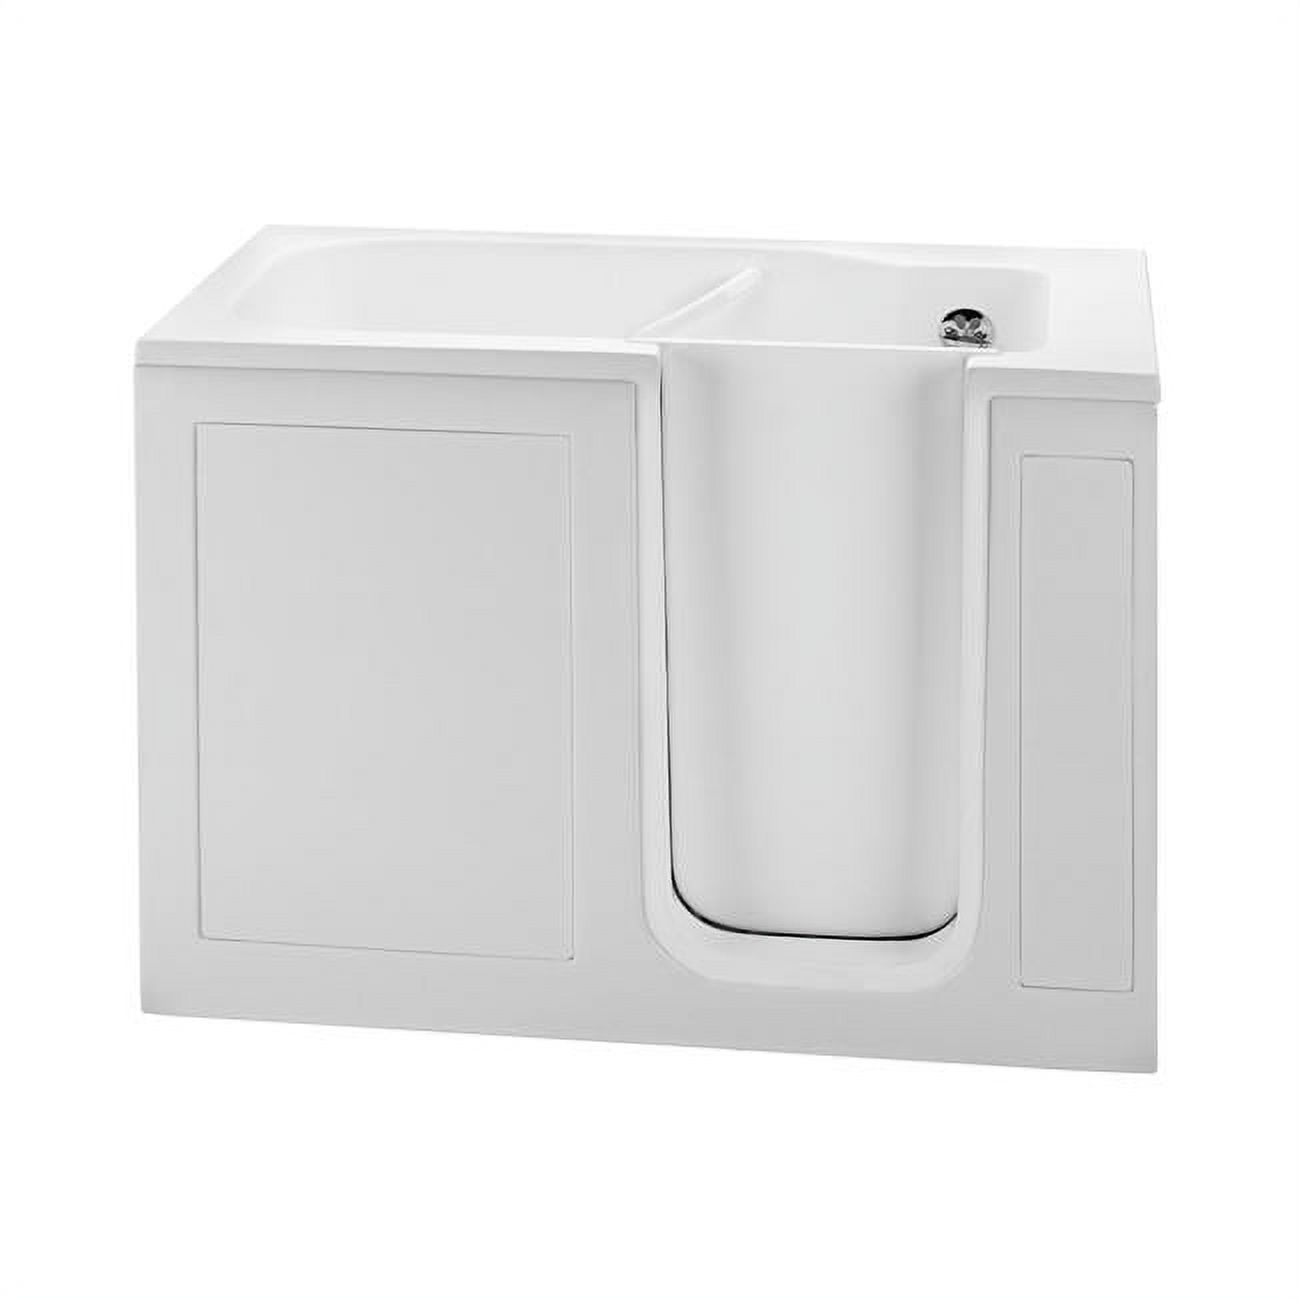 Walk in Air Bath WP Combo with Radiance & Valves, White - 51.5 x 30.25 x 37.5 in. - image 1 of 1